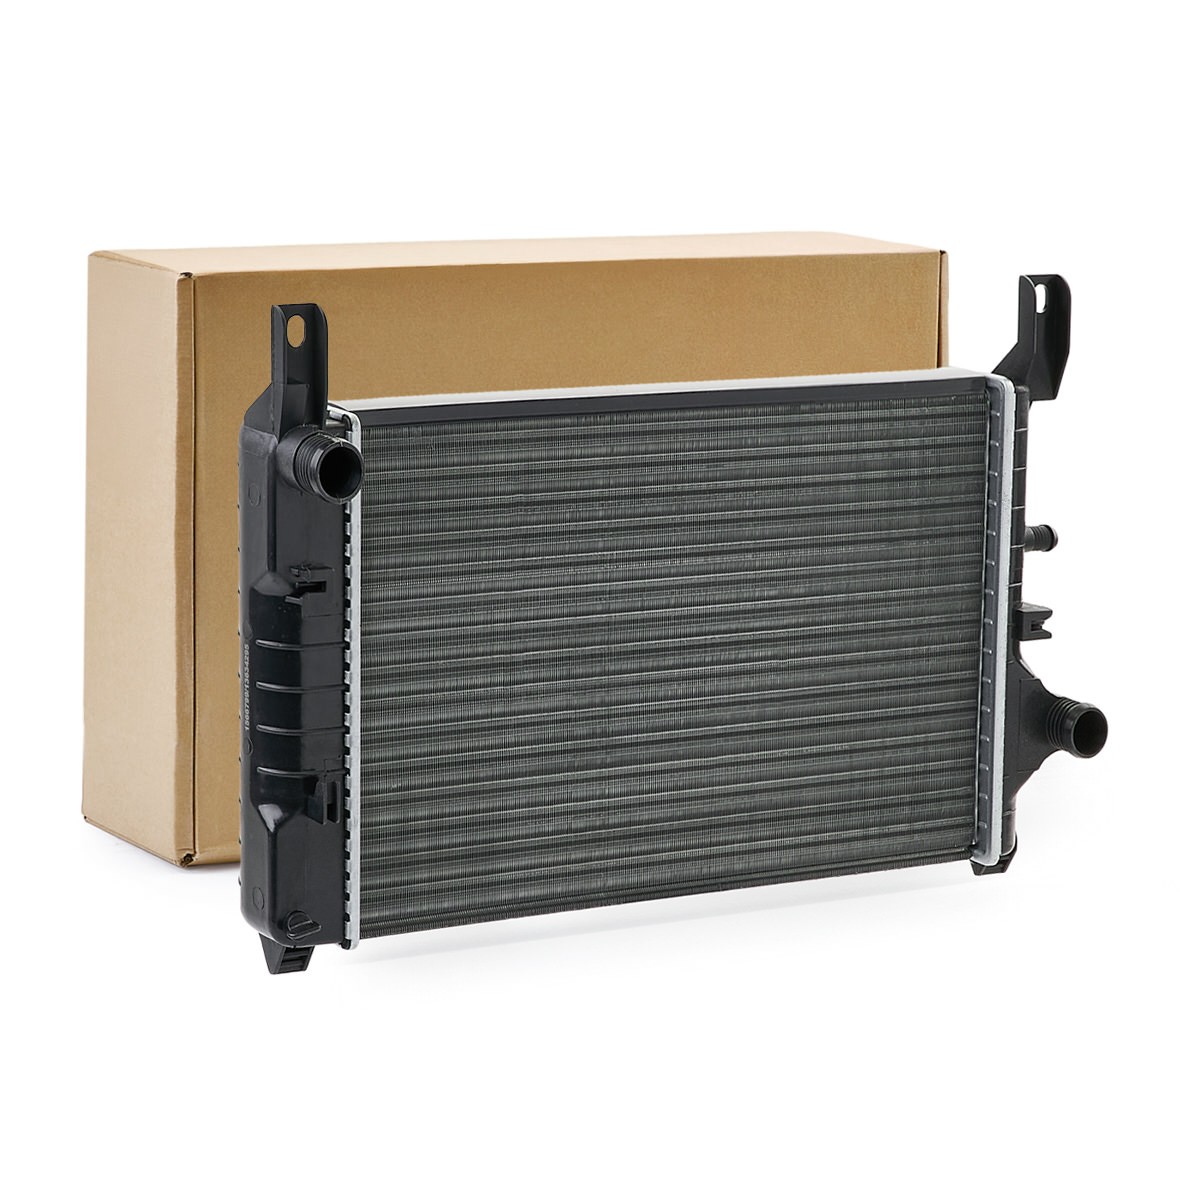 RIDEX 470R0722 Engine radiator for vehicles without air conditioning, 494 x 277 x 28 mm, Manual Transmission, Brazed cooling fins